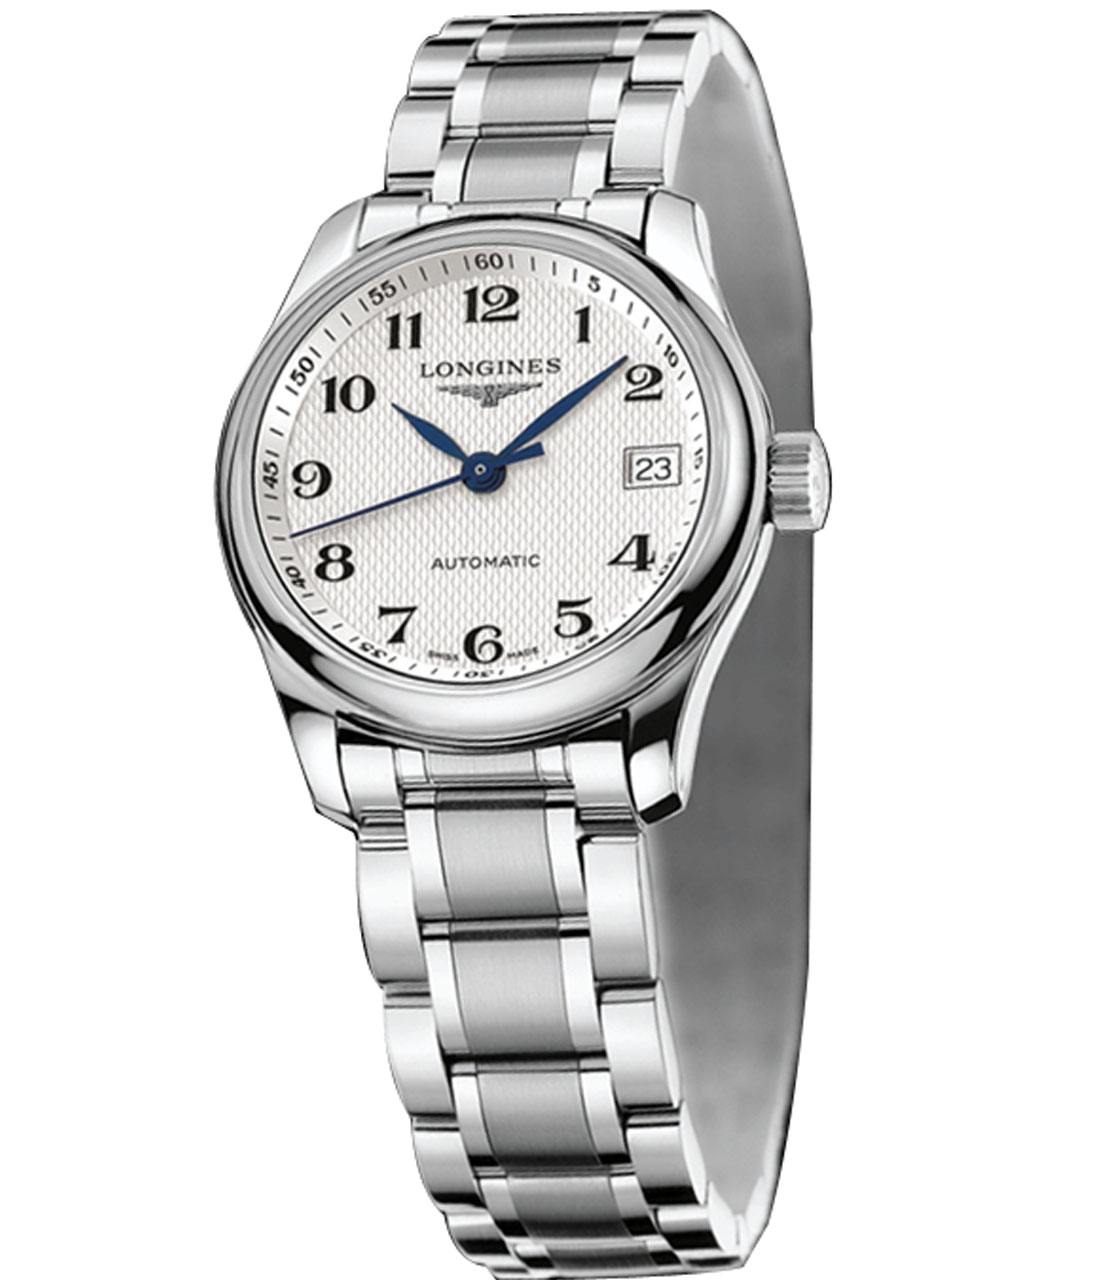 2018 New Edition Longines Master Series L2.257.4.78.6 Ladies Mechanical Watch 2671 Movement - Click Image to Close